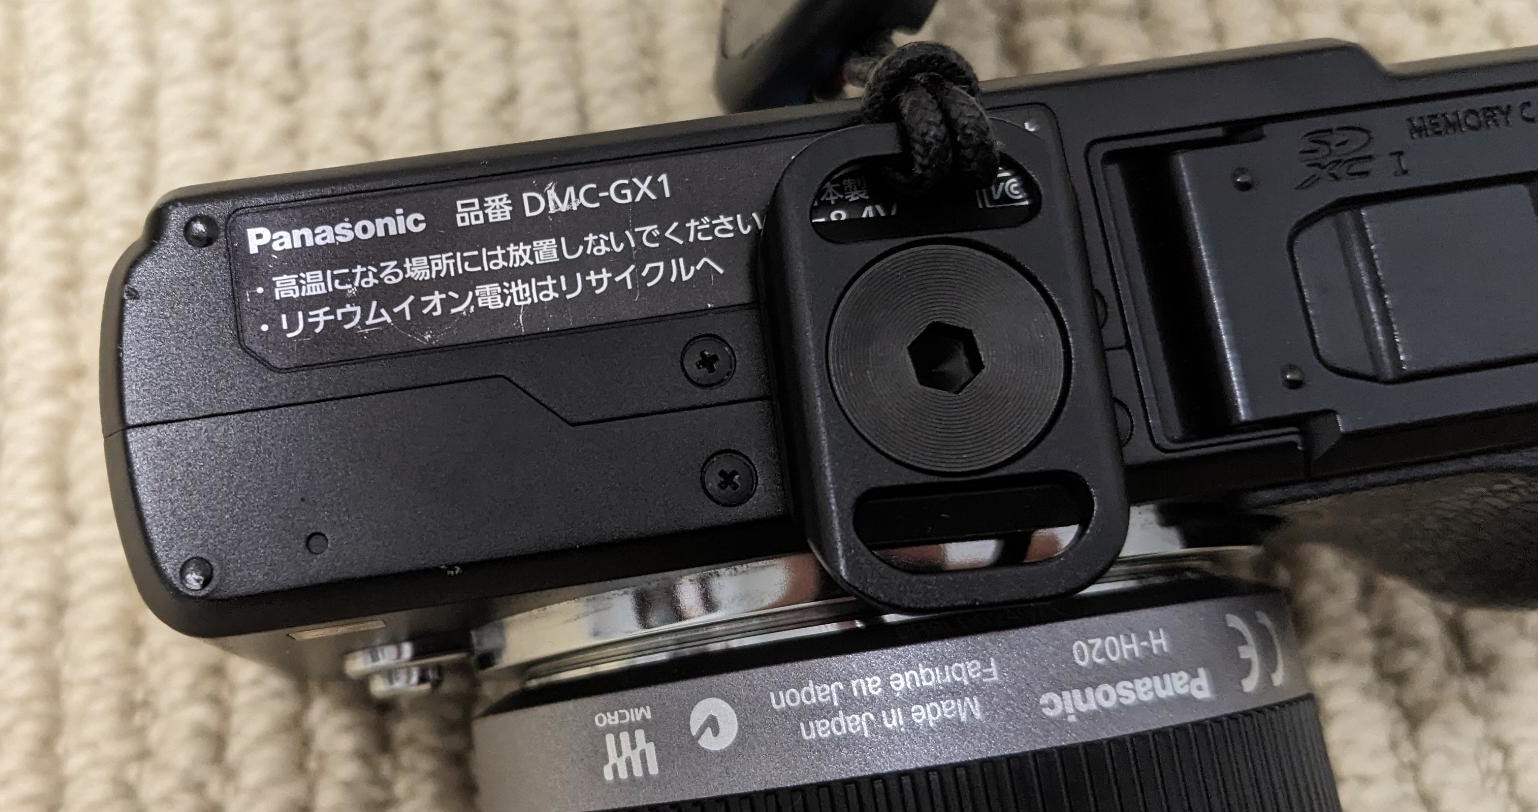 Japanese GX1 cameras have Japanese text on the sticker